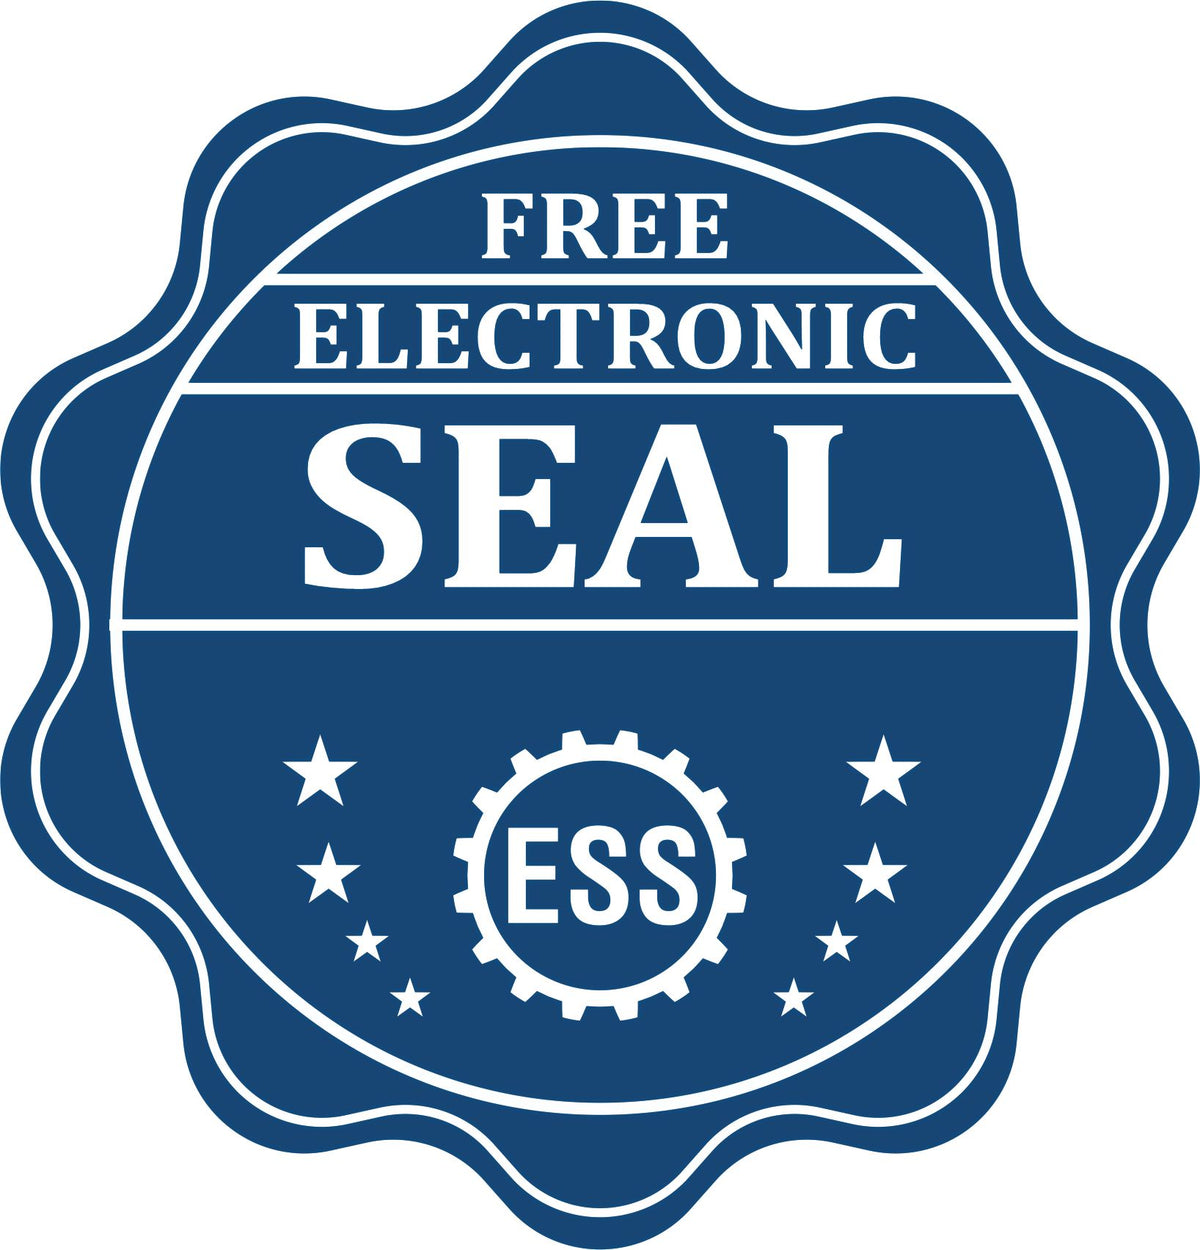 A badge showing a free electronic seal for the Slim Pre-Inked Illinois Professional Engineer Seal Stamp with stars and the ESS gear on the emblem.